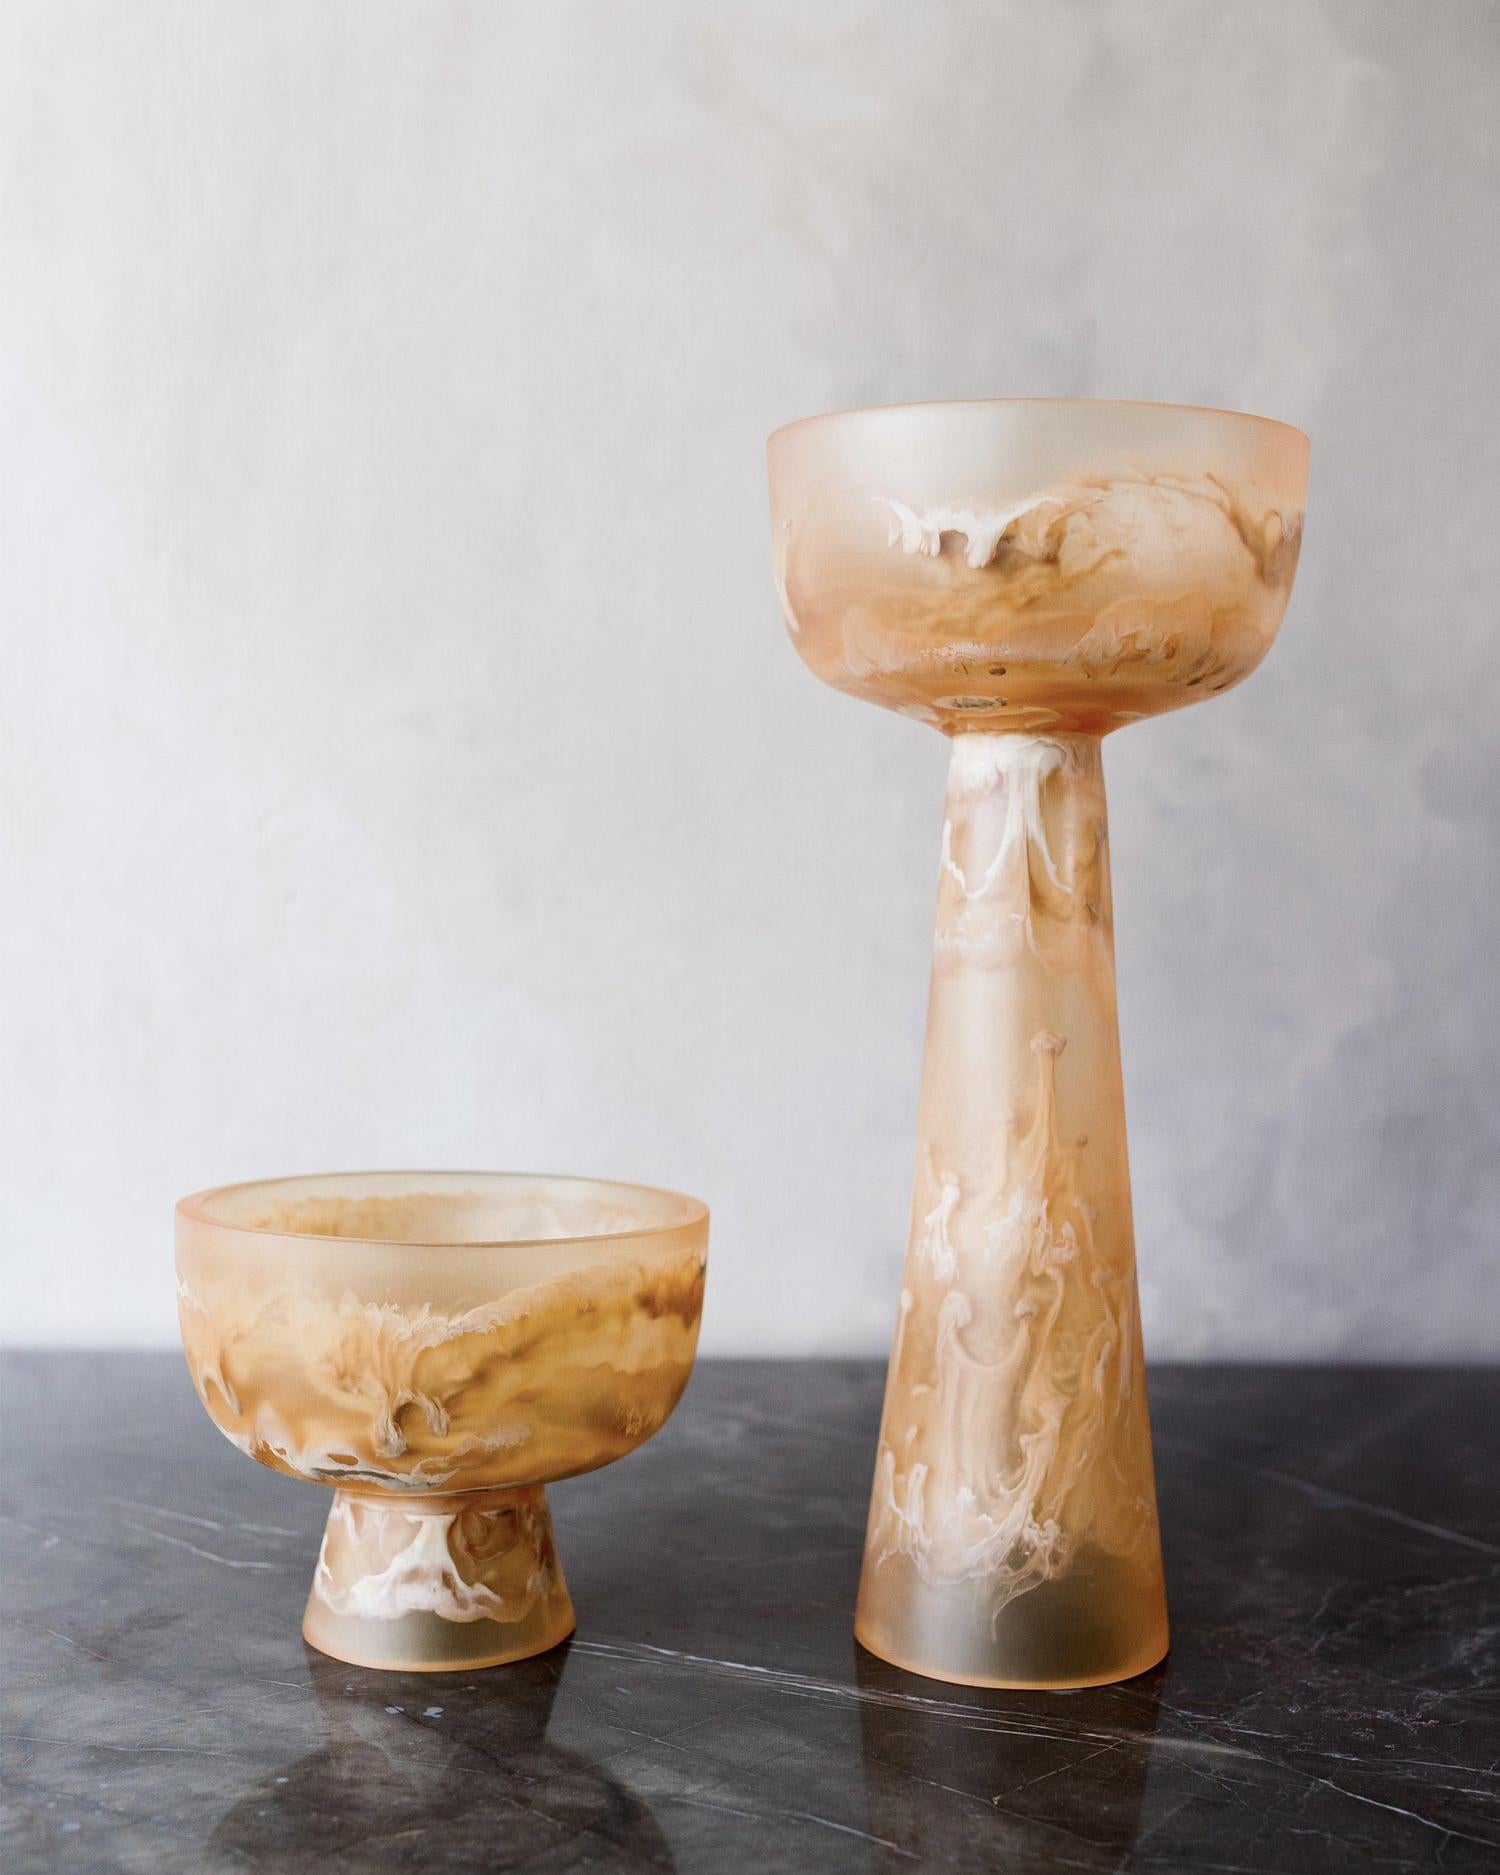 This caramel high resin pedestal bowl is a beautiful example of the artisanal craftsmanship that goes into each piece designed by Monica Calderon and handmade by expert artisans in Mexico. The high resin pedestal bowl in beige is made from a